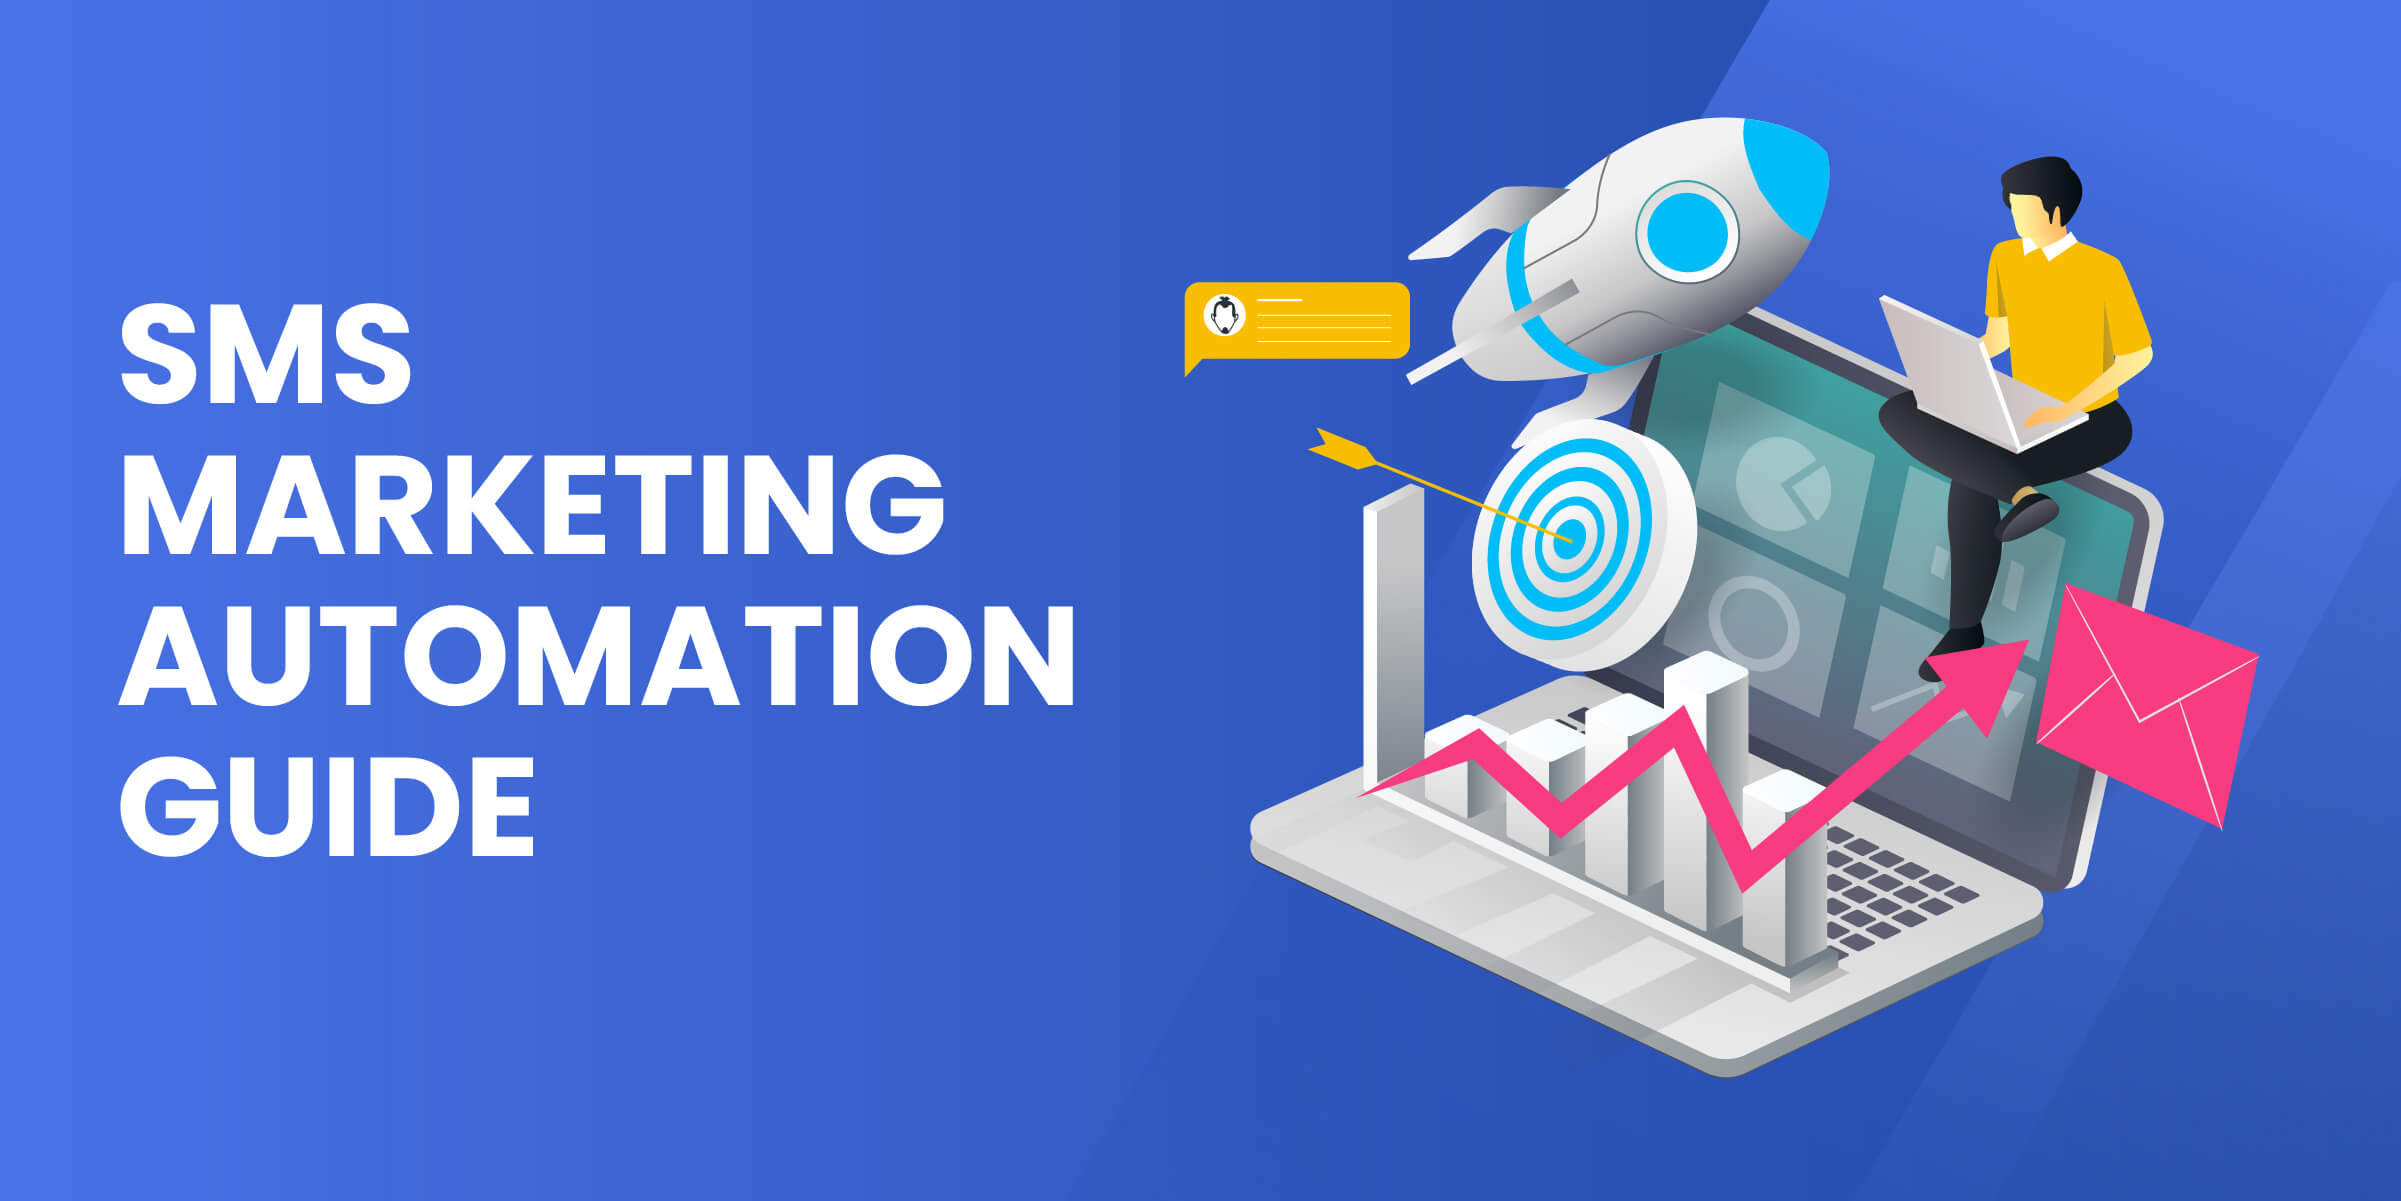 SMS Marketing Automation Guide